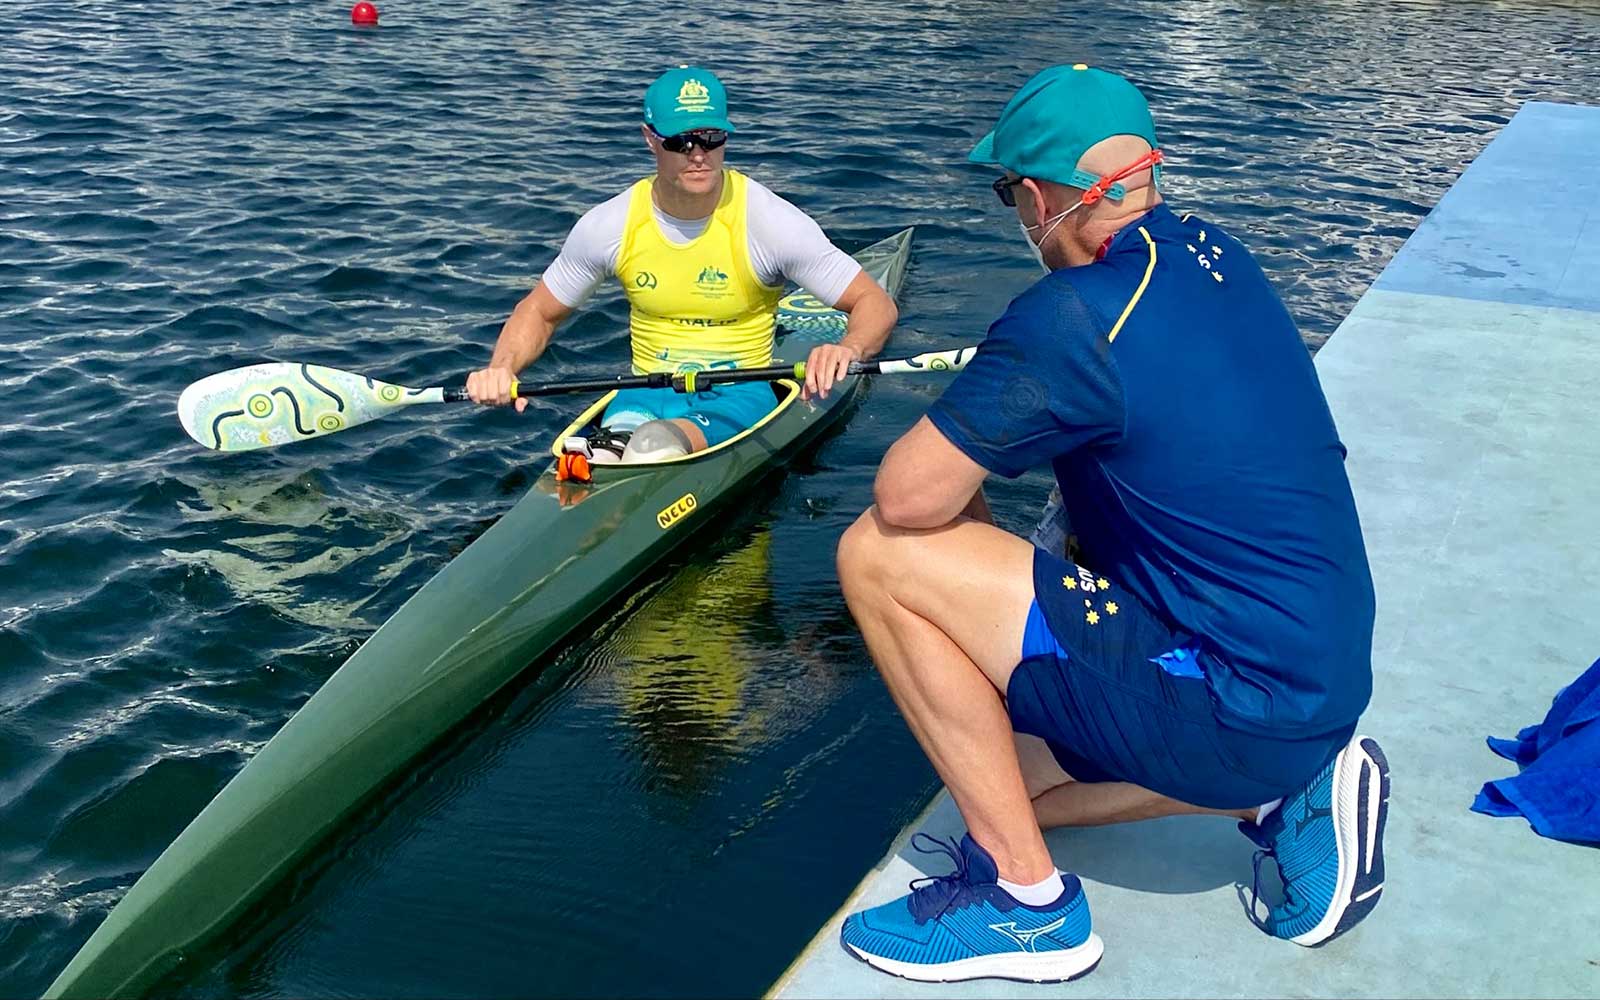 New events added to Para-canoe program puts Aussies in the hunt for more glory